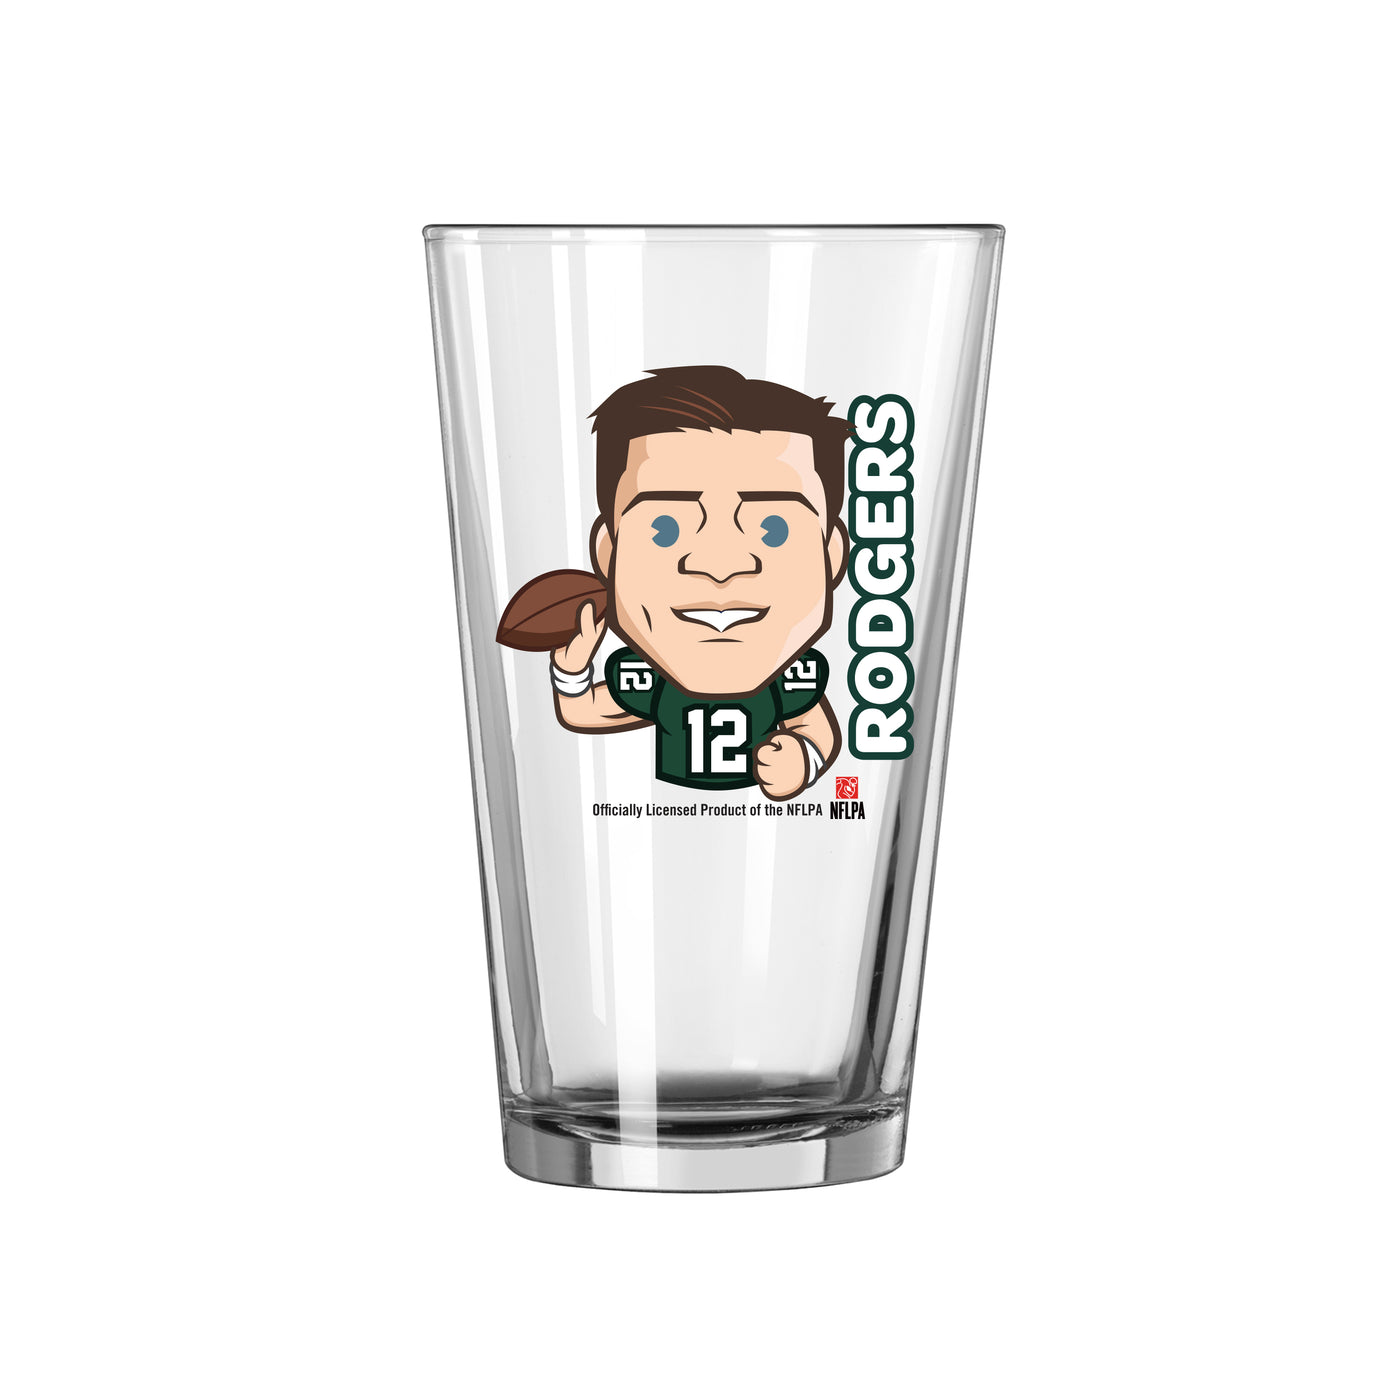 GB Packers Aaron Rodgers Caricature 16oz Pint Glass